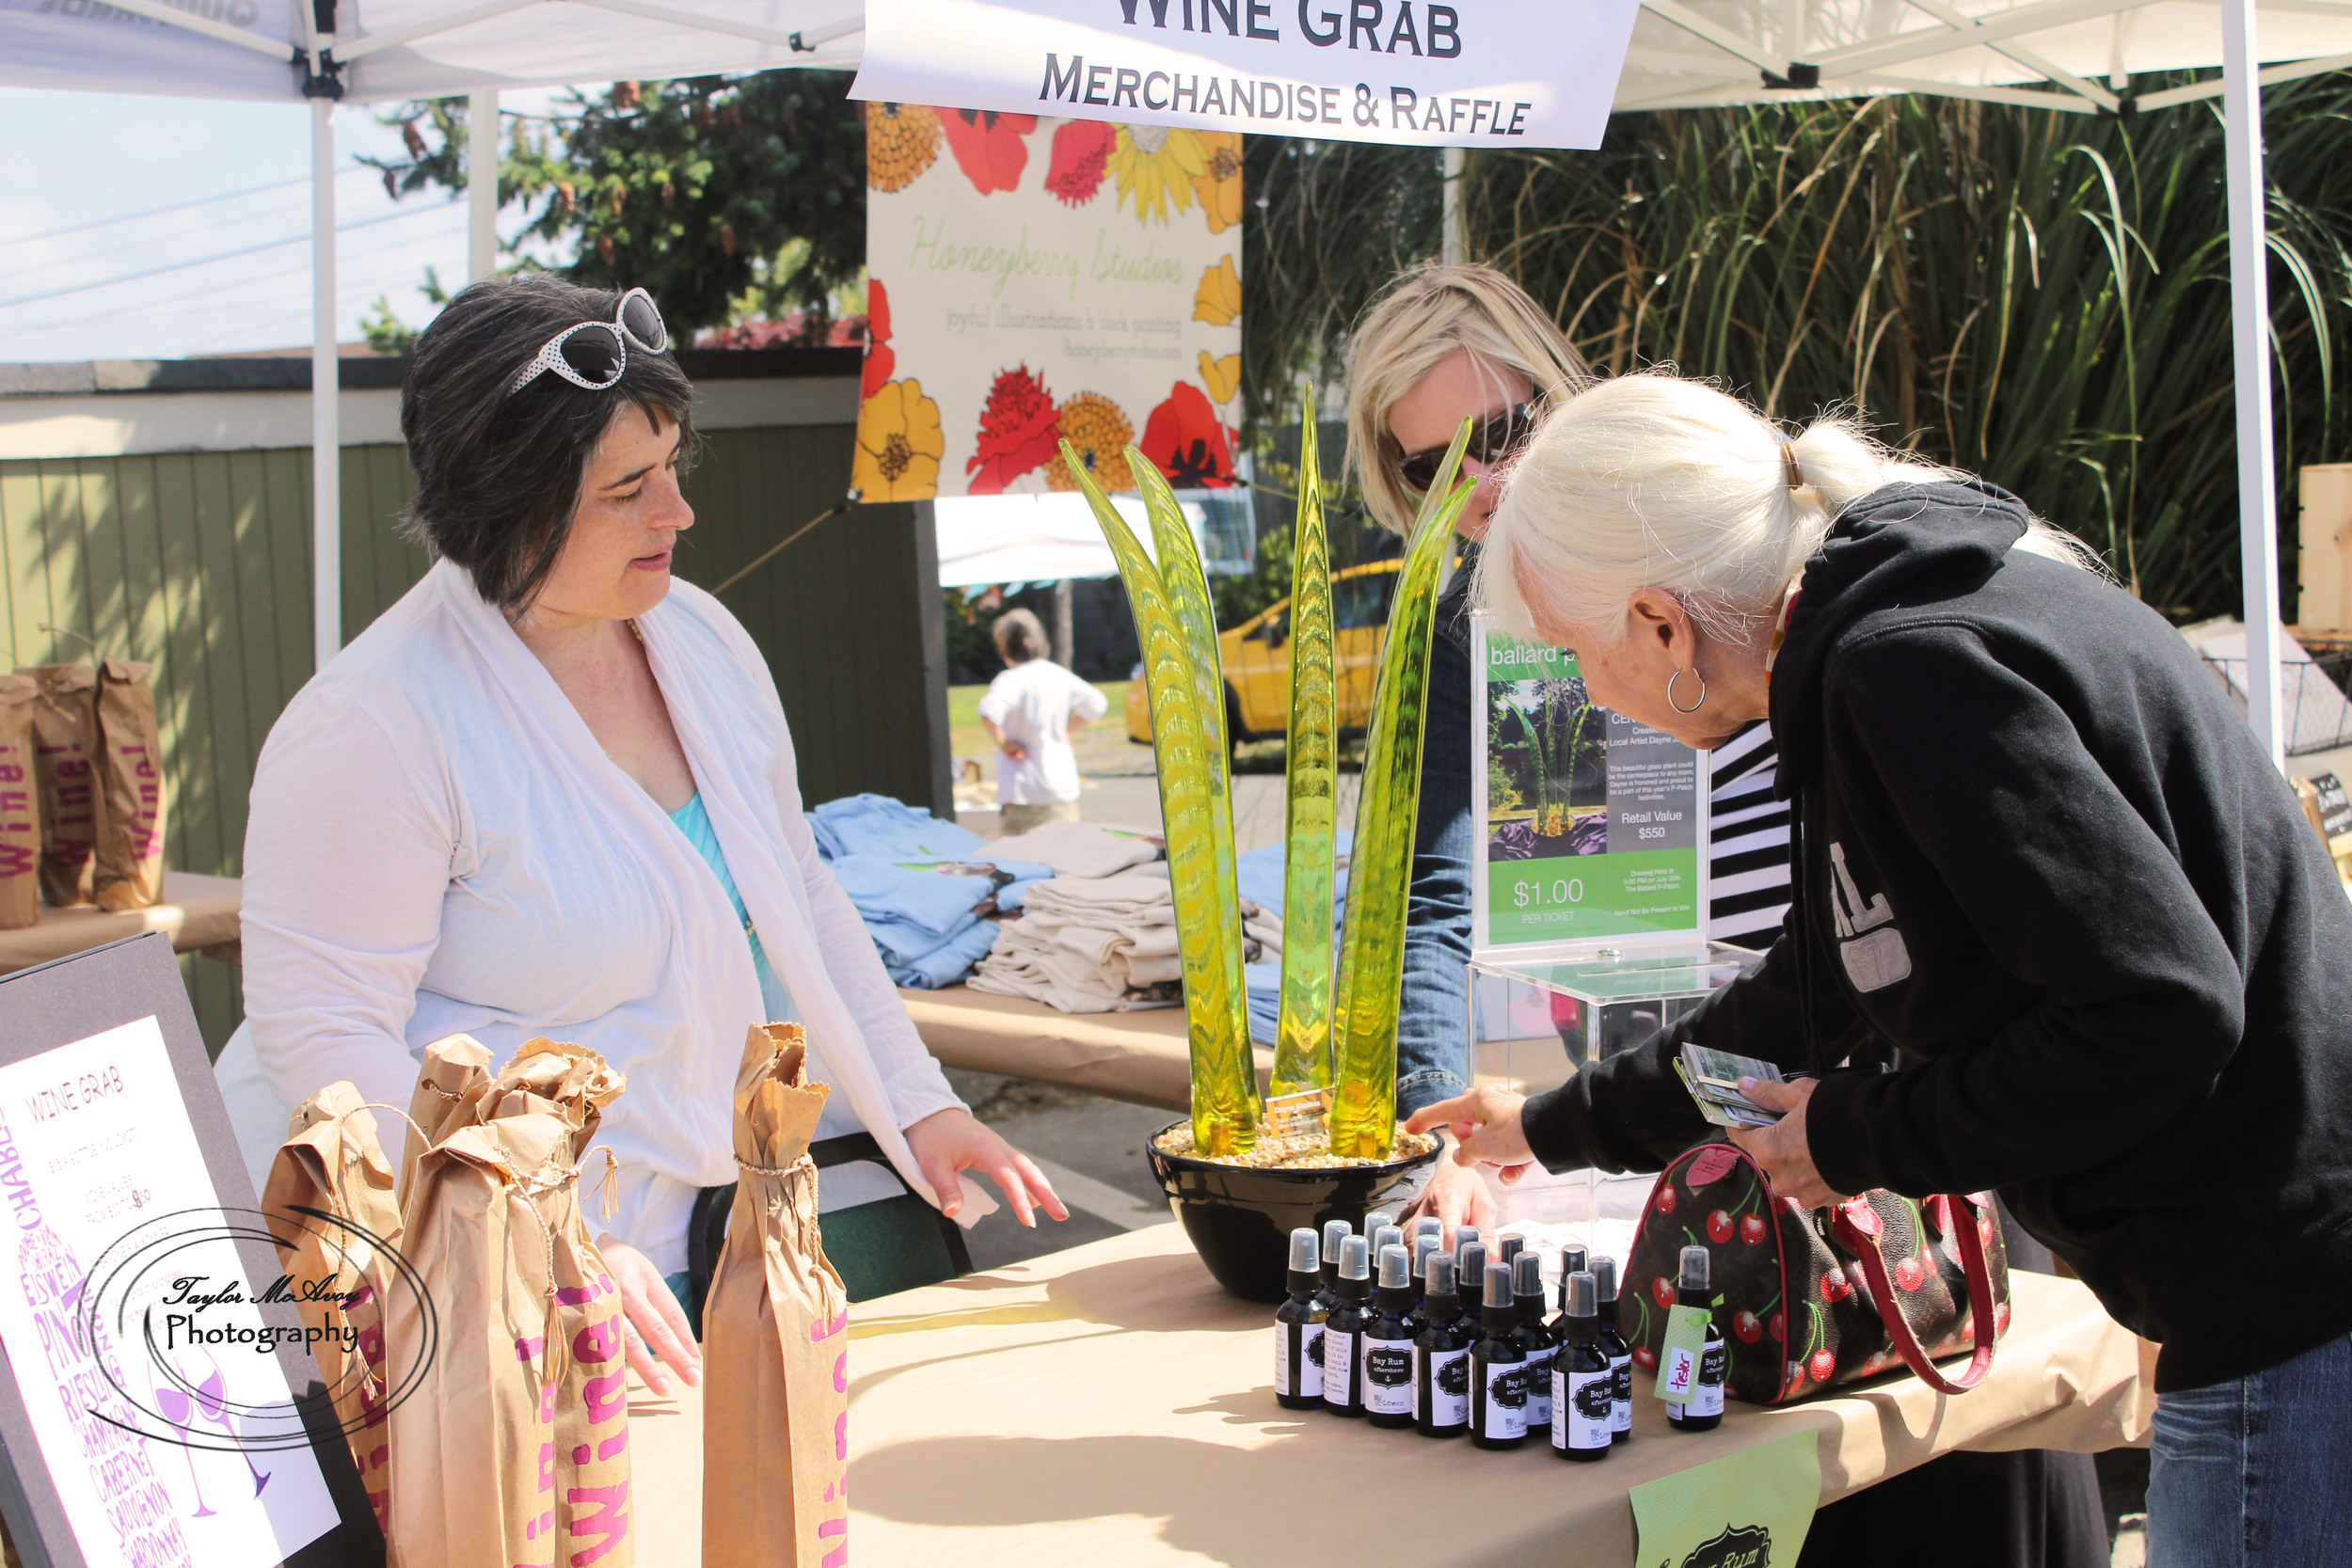  Dahlia Cohen chats with customers about the Wine Grab as they sign up for a raffle for a piece of glass art by Dayne Lopez. The Wine Grab features volunteer donated wine organized in Red or White and the rest is a mystery until unwraped.&nbsp; 